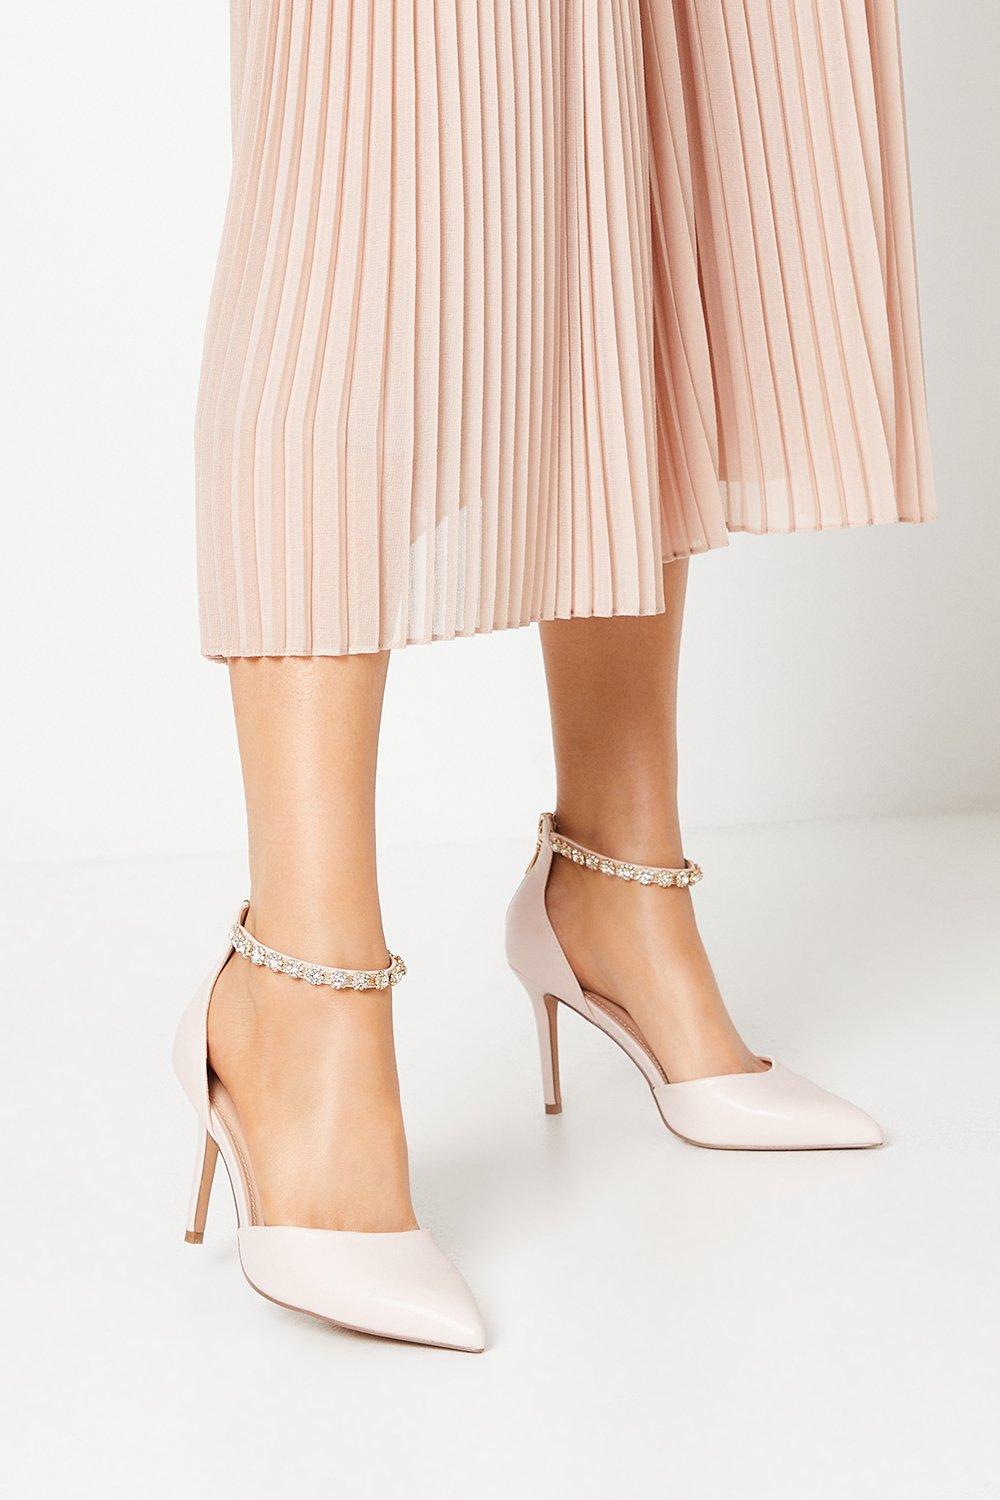 Tatiana Jewelled Anklet High Stiletto Court Shoes - Nude